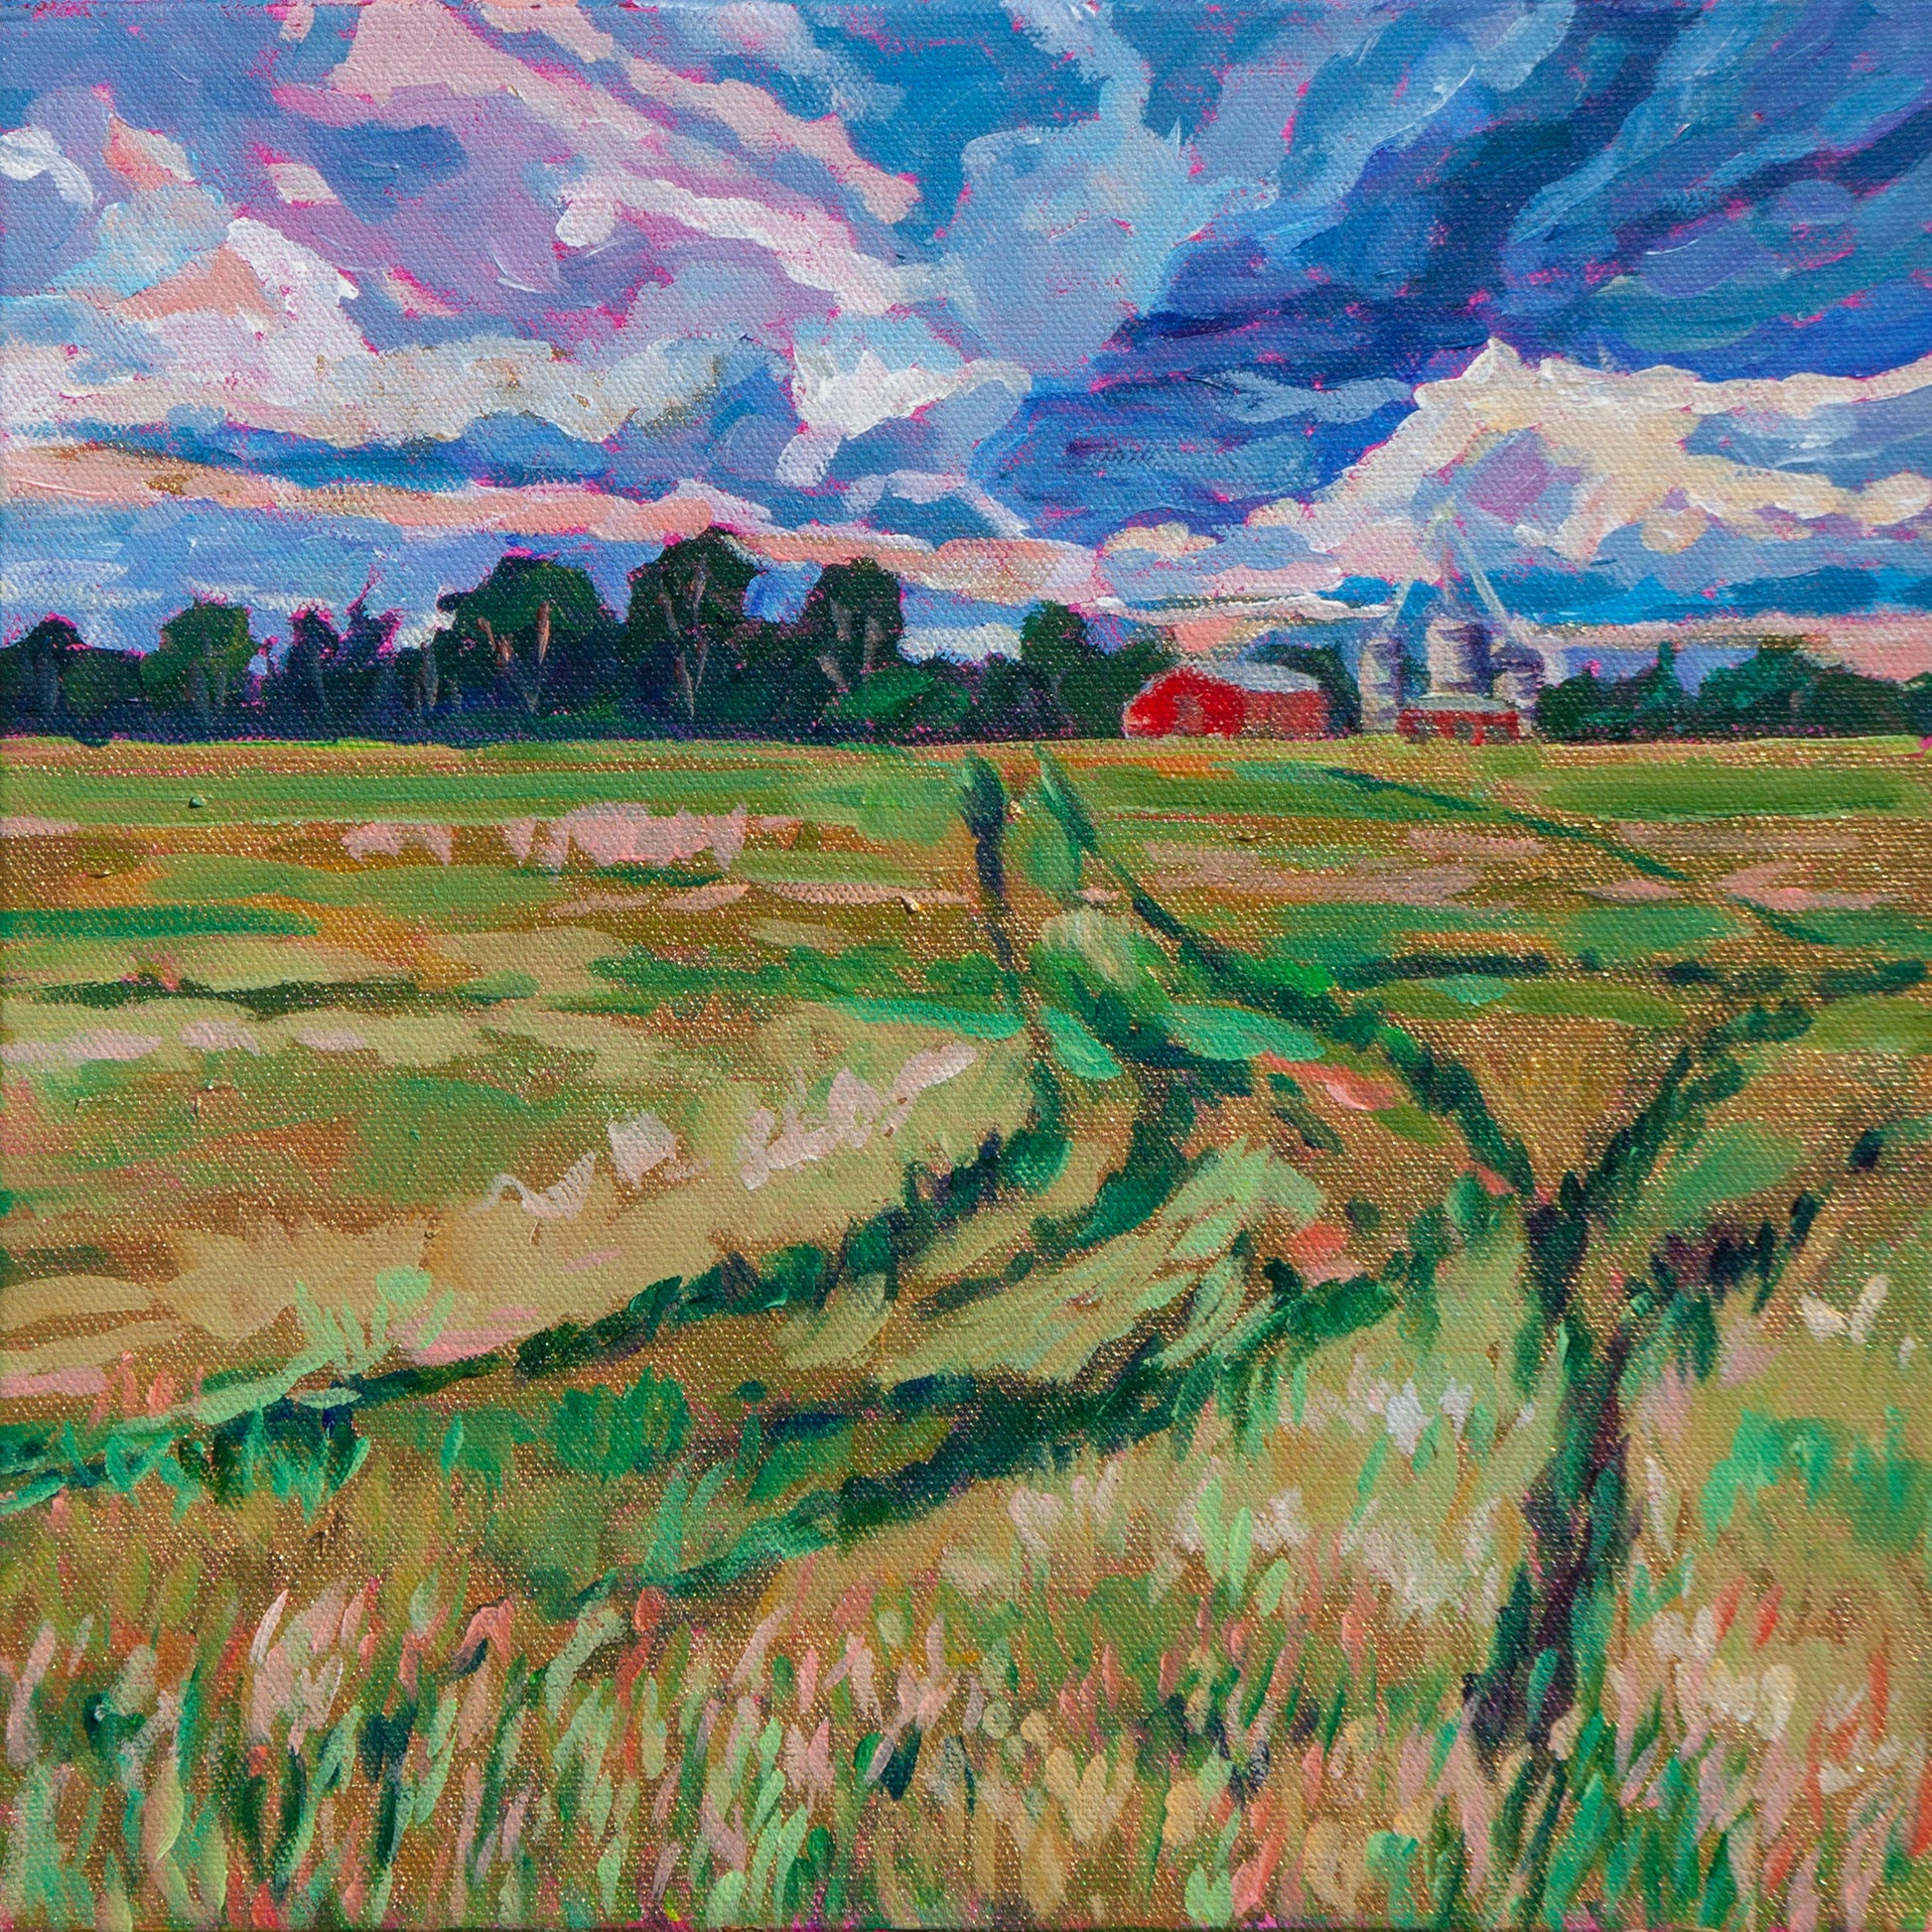 Michigan farmland painting of golden field of wheat with red barn and gold paint